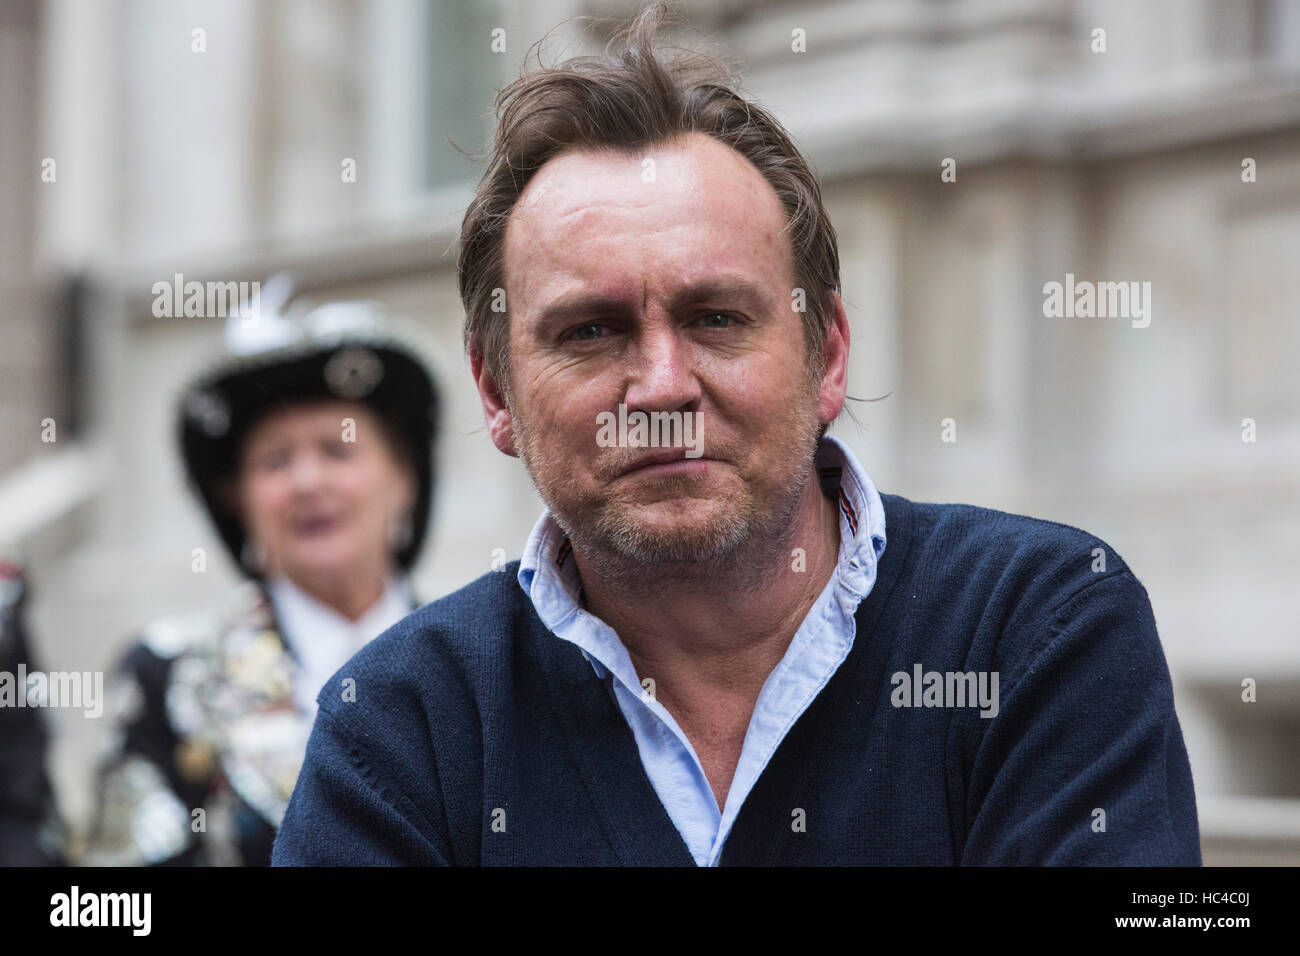 London, UK. 8 December 2016. Actor Philip Glenister. Launch event of the 2017 London's New Year's Day Parade at the Corinthia Hotel. The parade is themed 'Lights, Camera, Actions and will feature characters from the movies. Credit:  Nick Savage/Alamy Live News Stock Photo